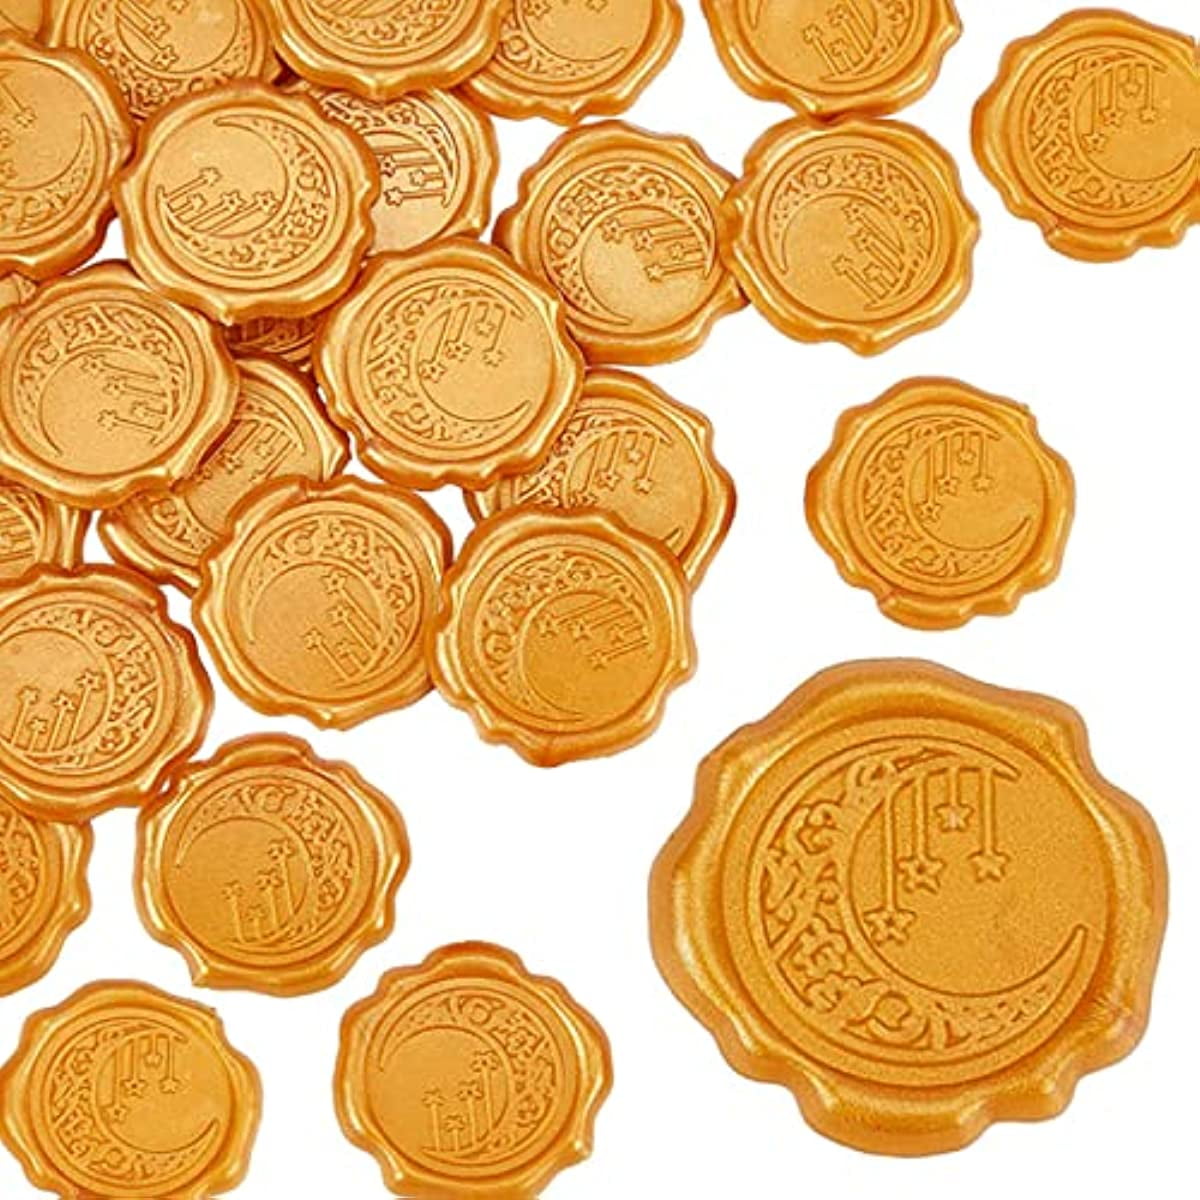 Vellum Gold Flake Wax Seal Stickers, Pack of 10 Wax Seals by Eva